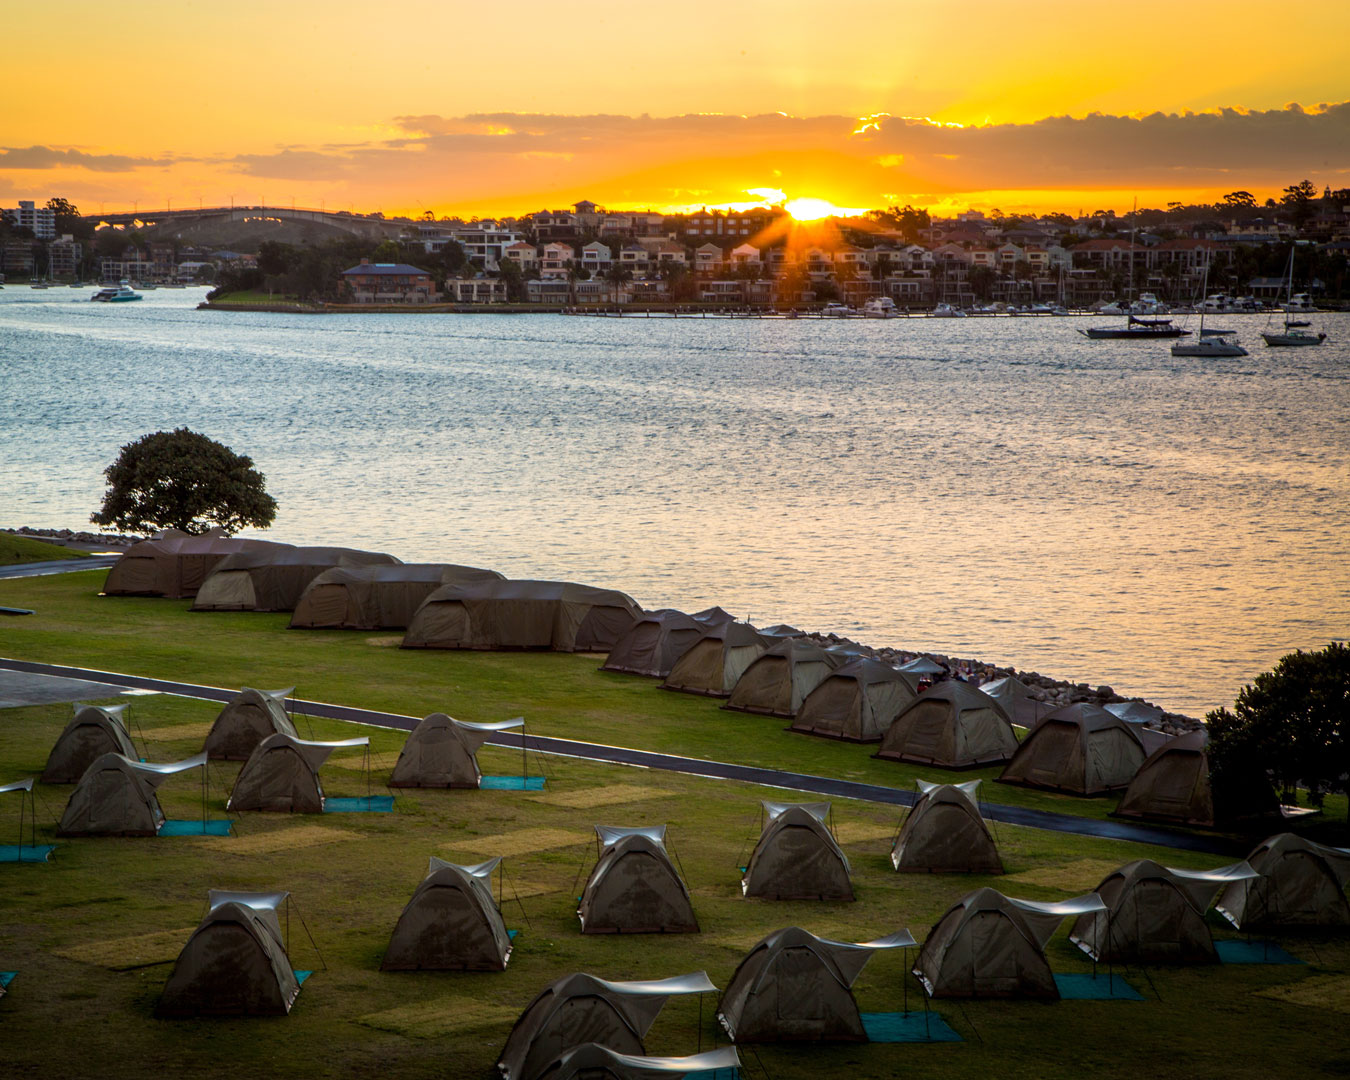 Tents on Cockatoo Island at sunset